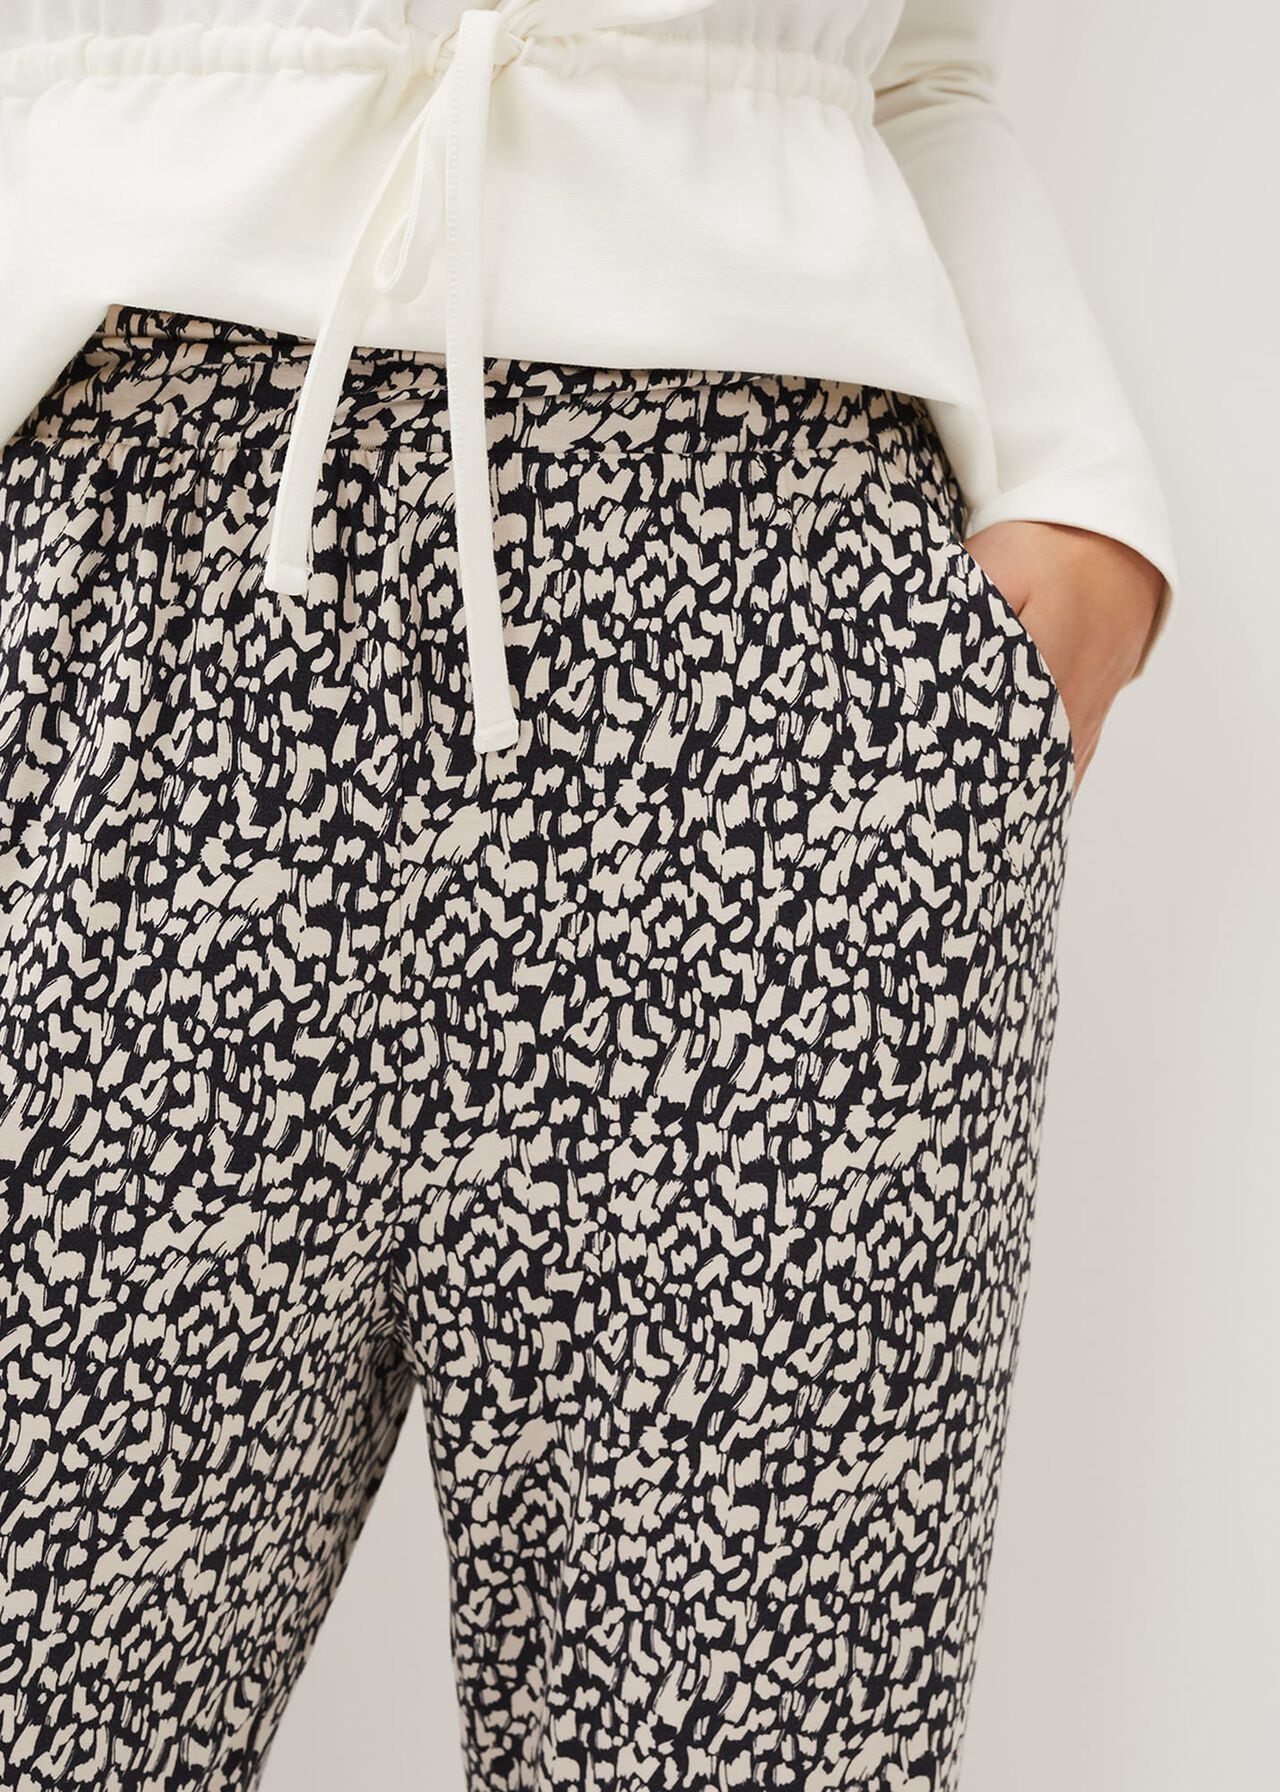 Milee Printed Jersey Joggers